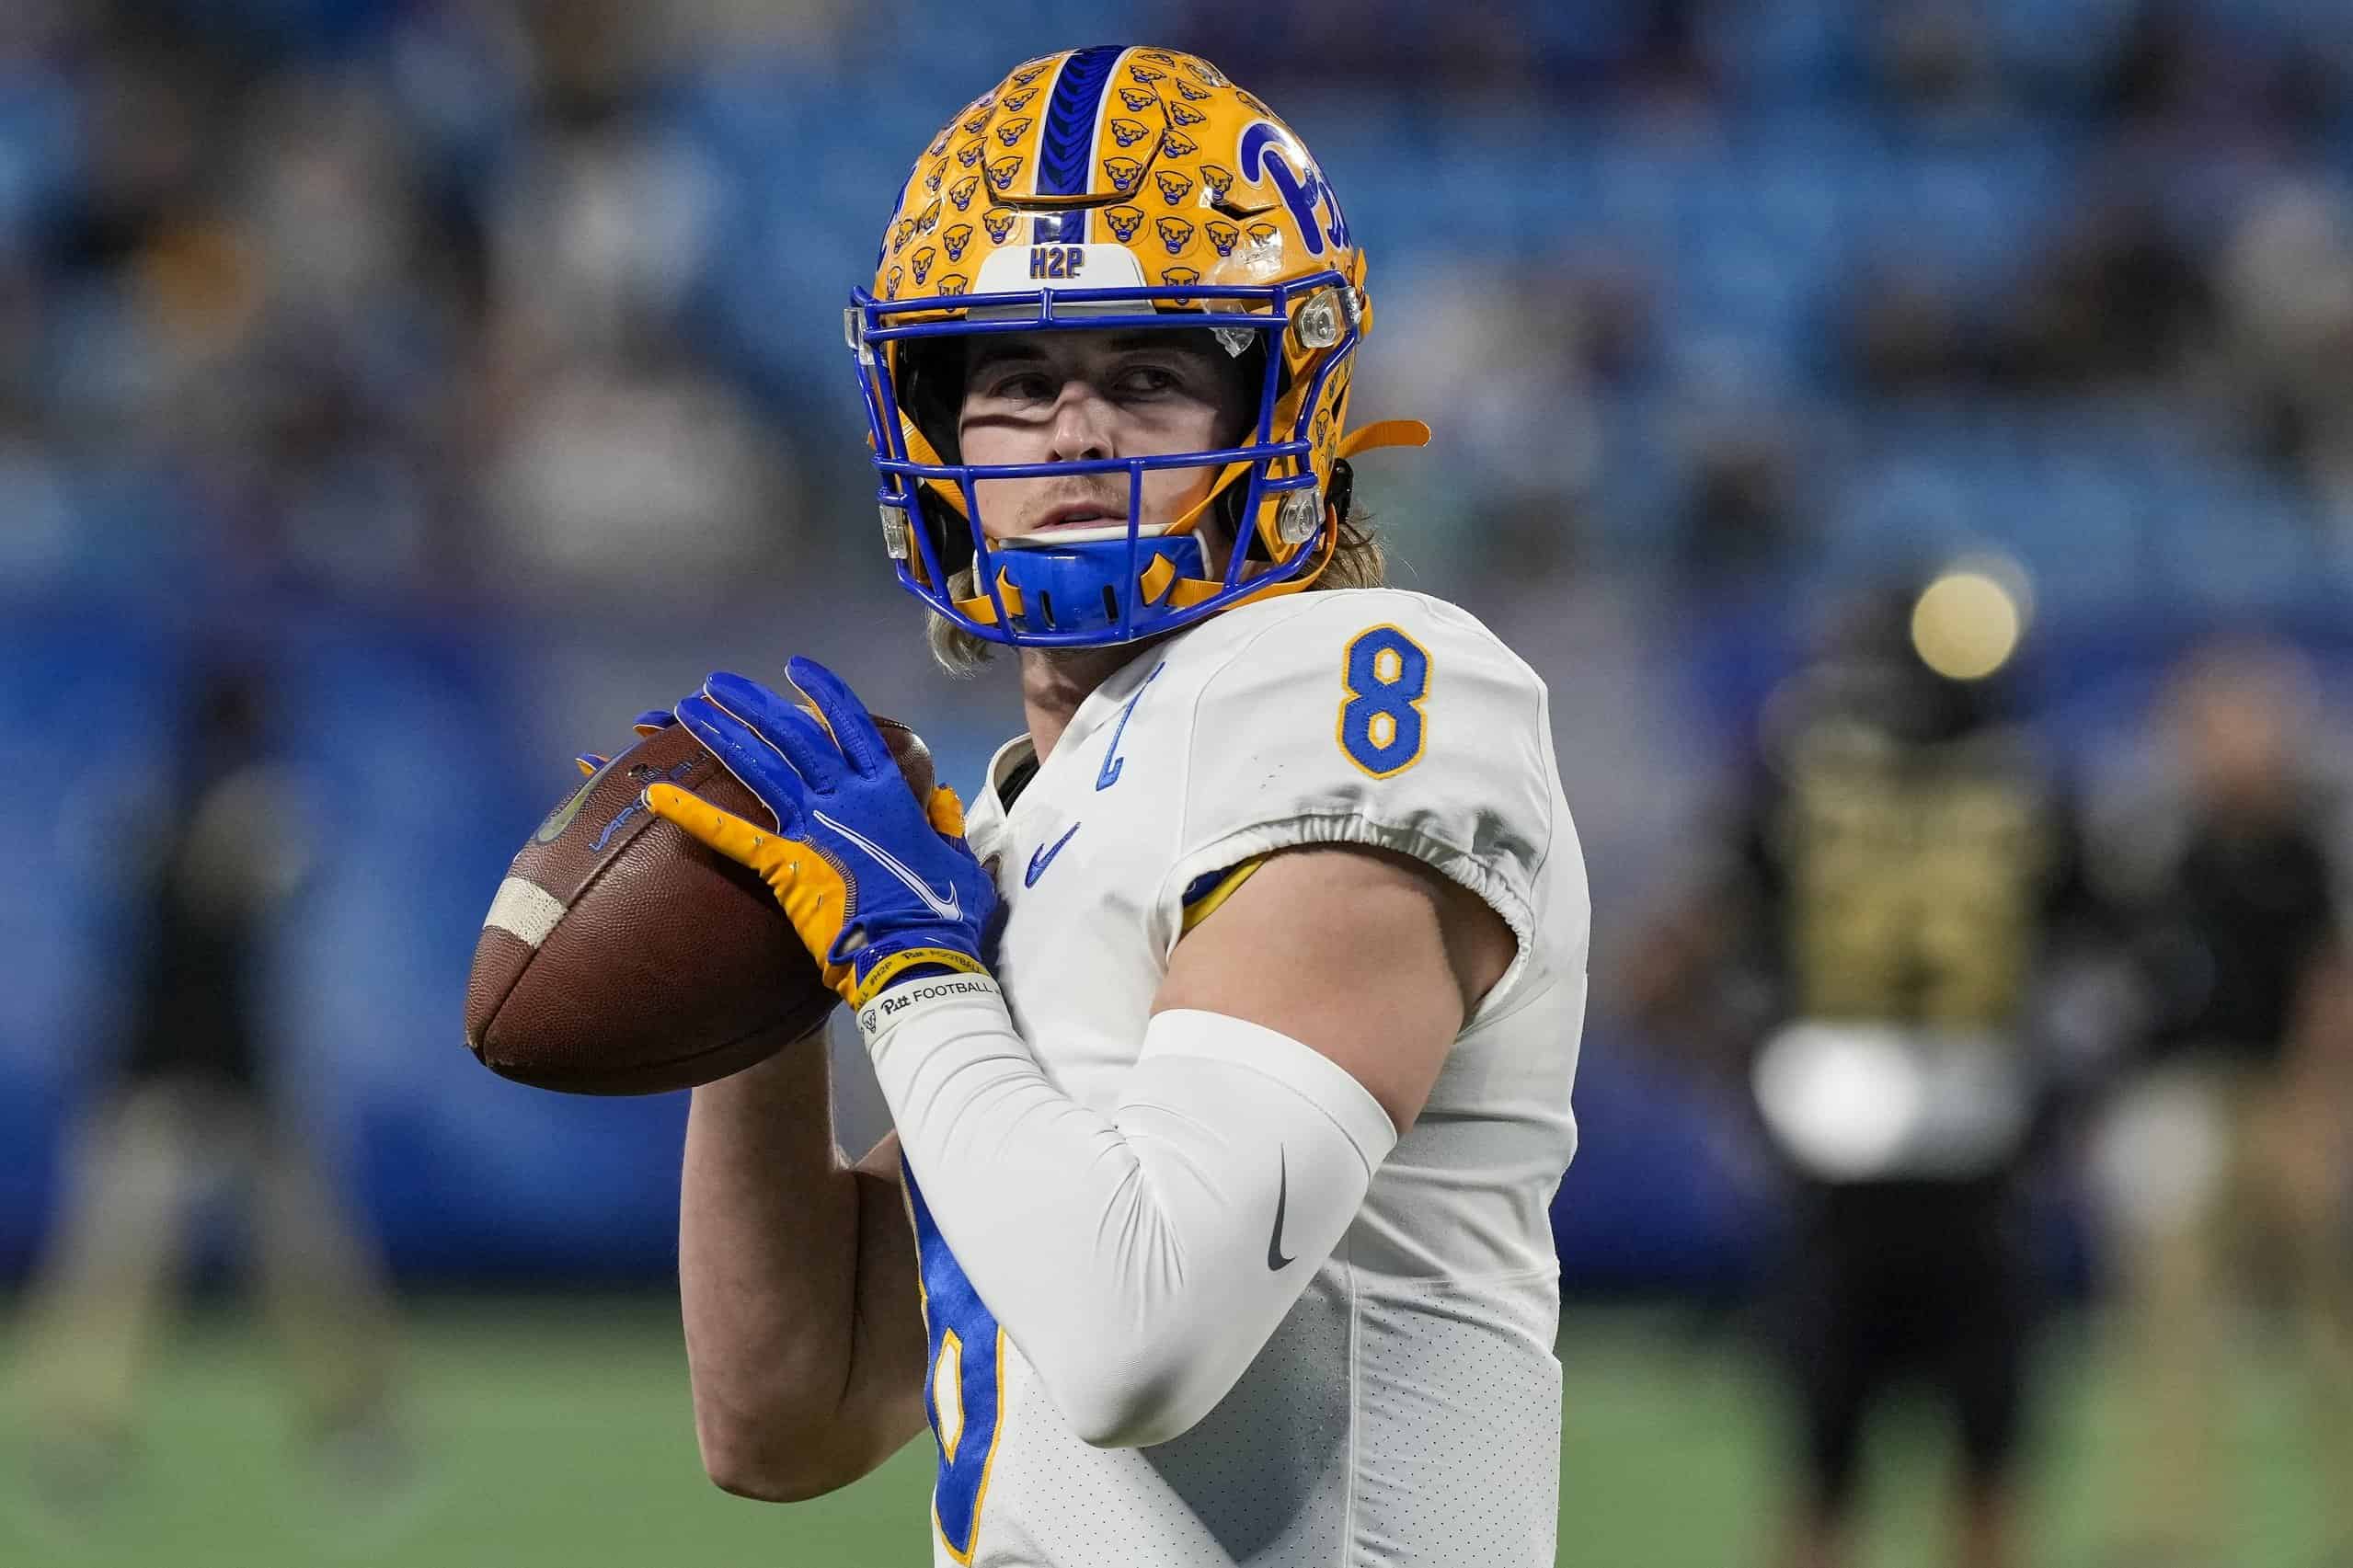 2022 nfl draft top prospects by position